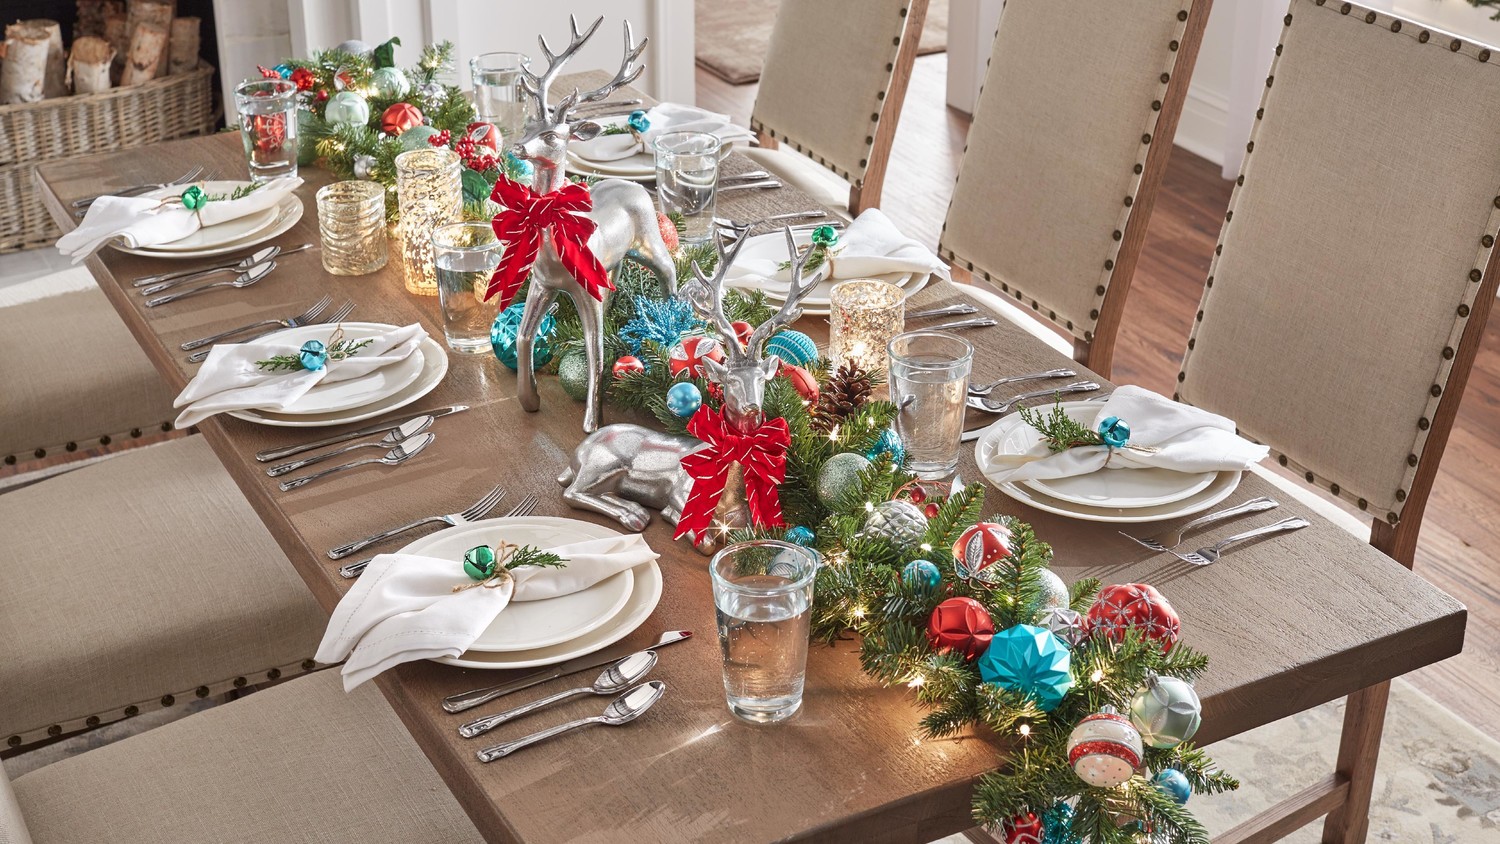 Image result for Christmas tablescapes martha stewart"